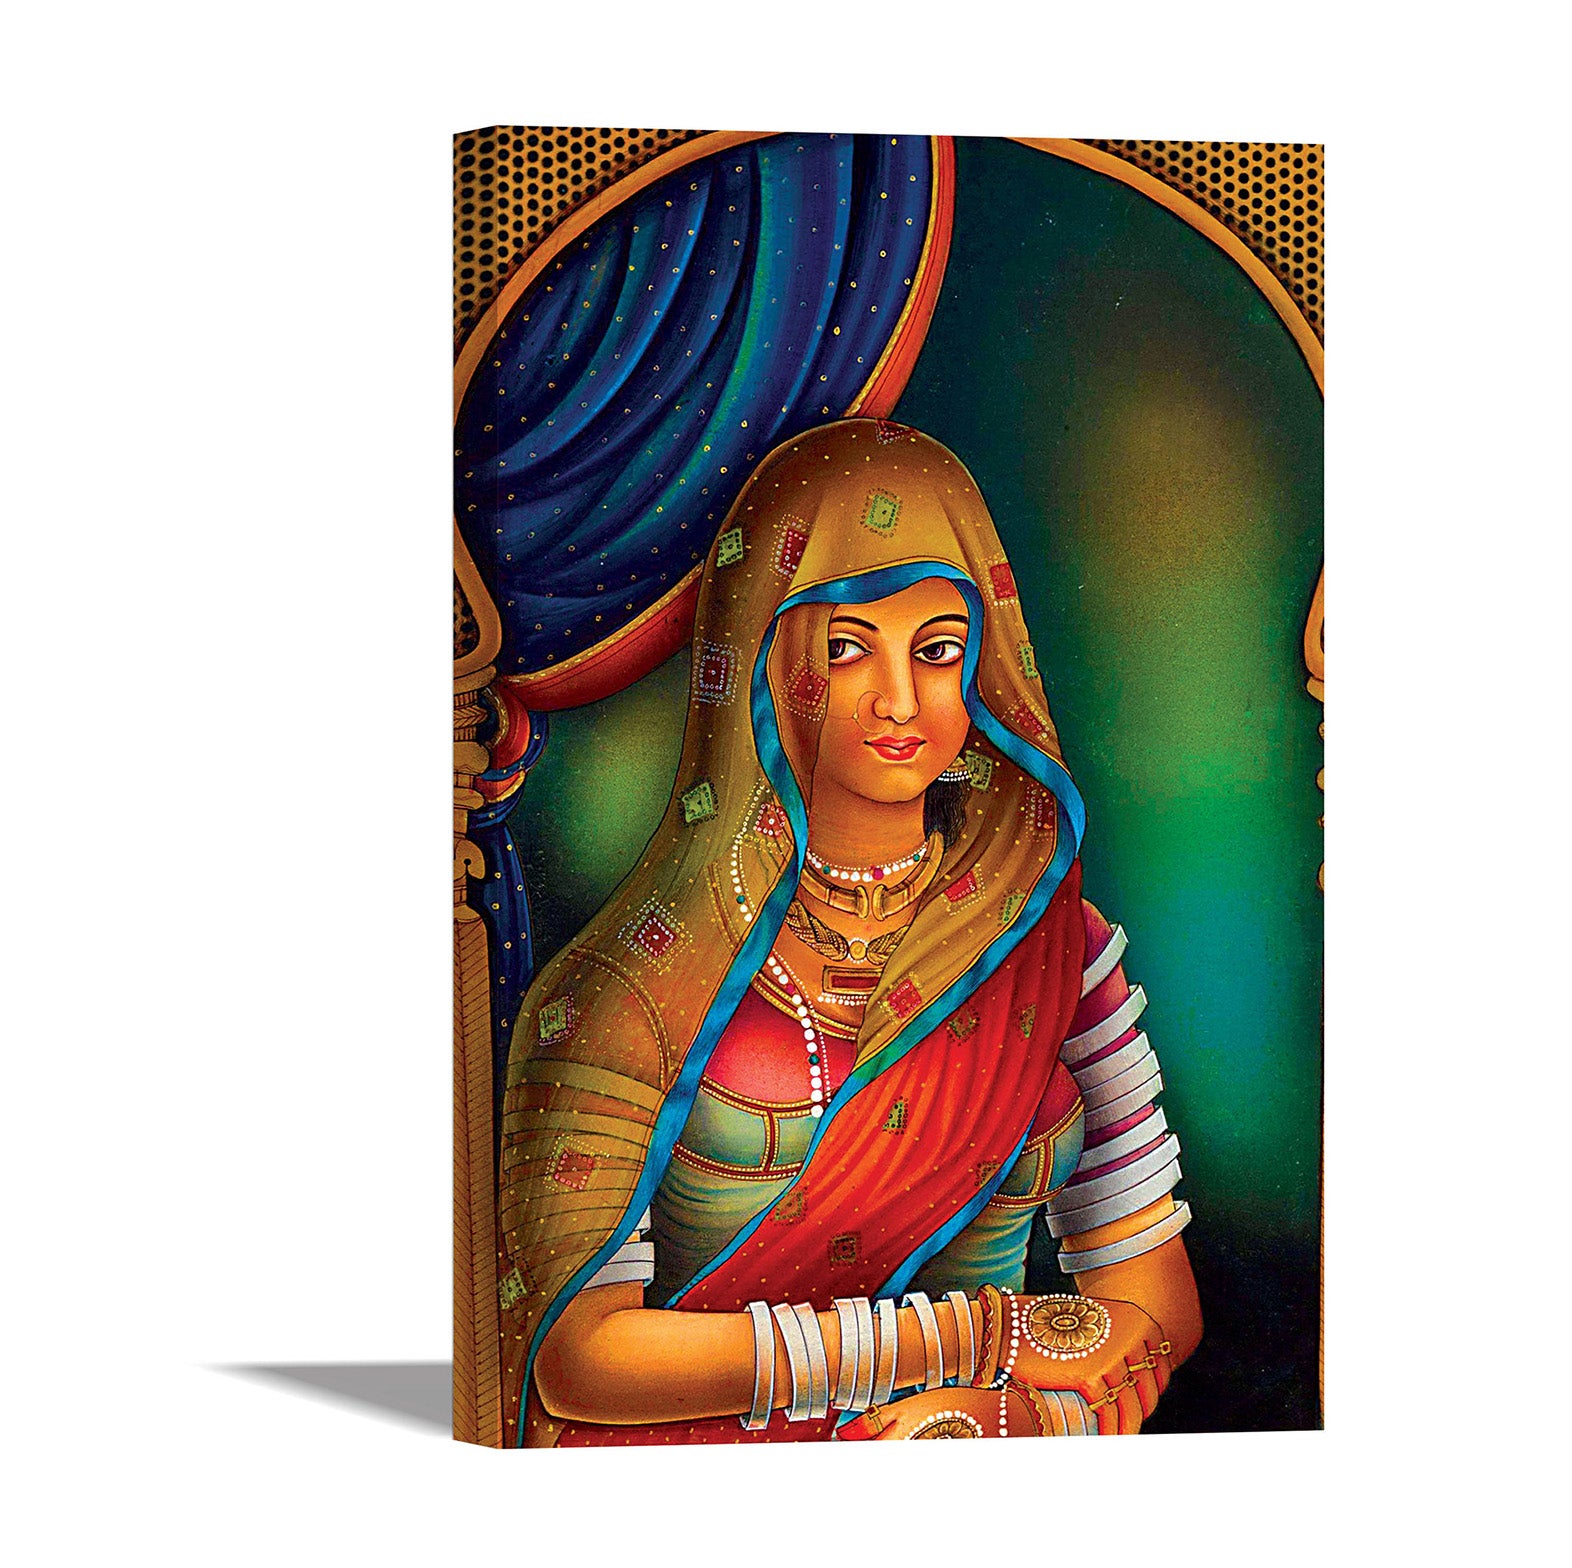 Rajasthani Queen